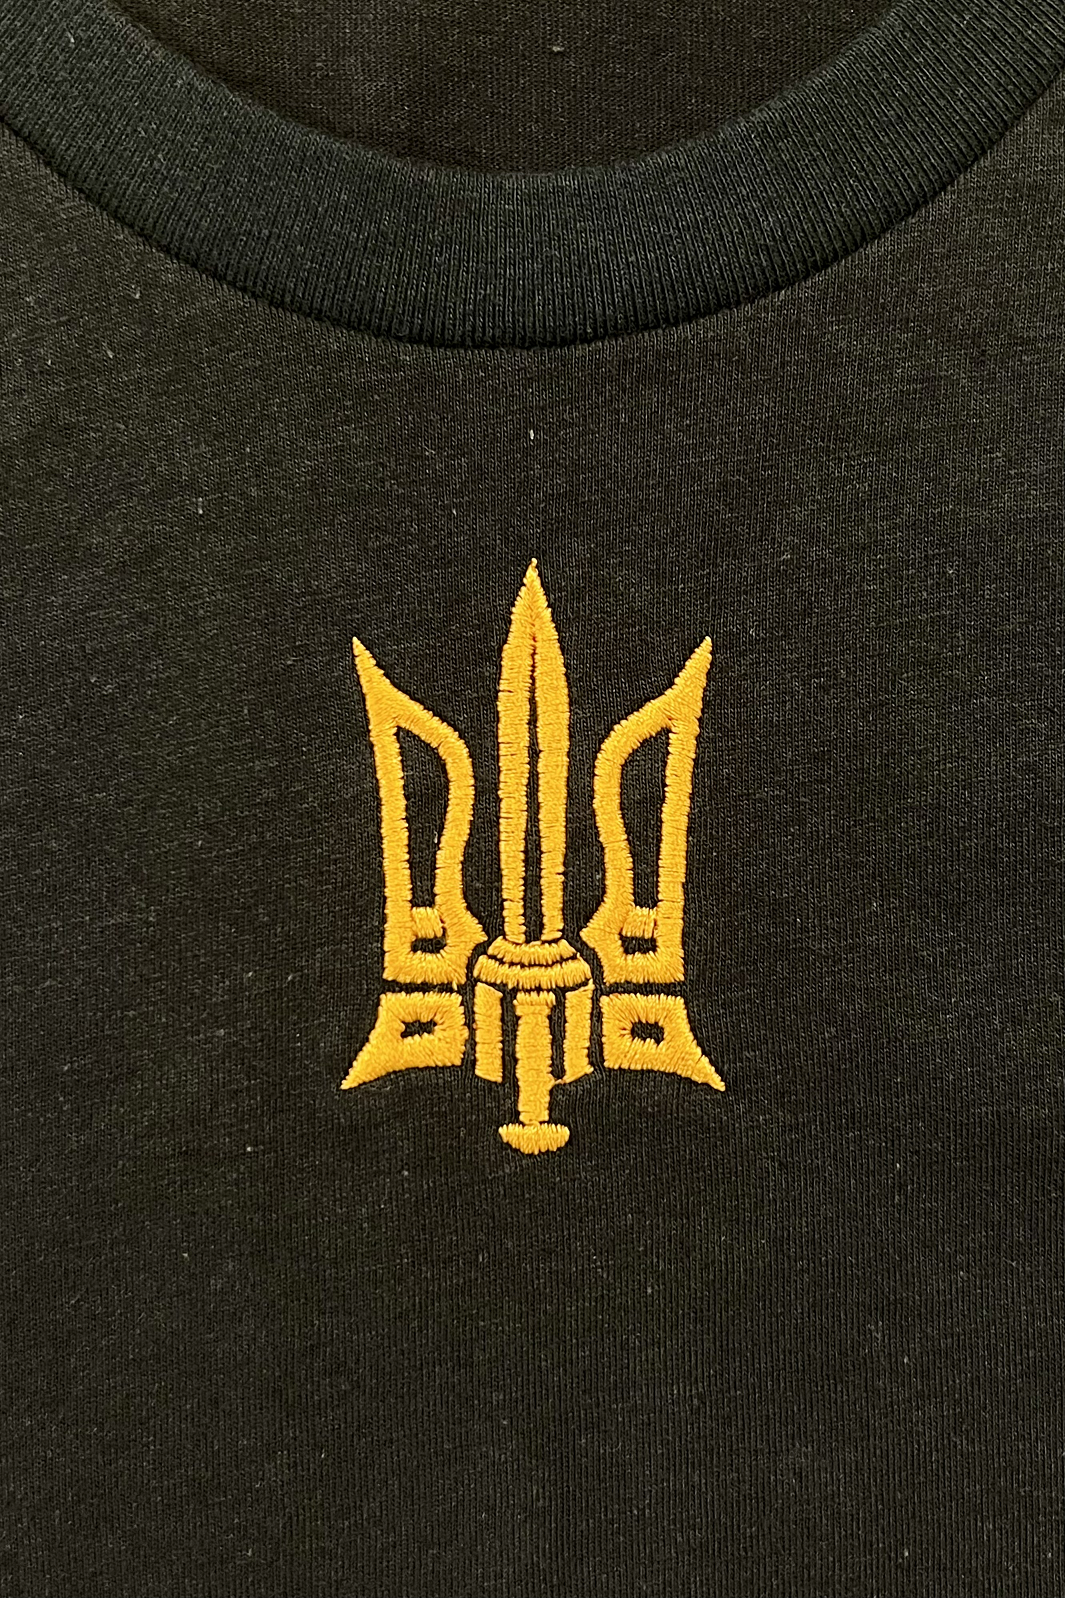 Adult embroidered t-shirt "Combat Tryzub"